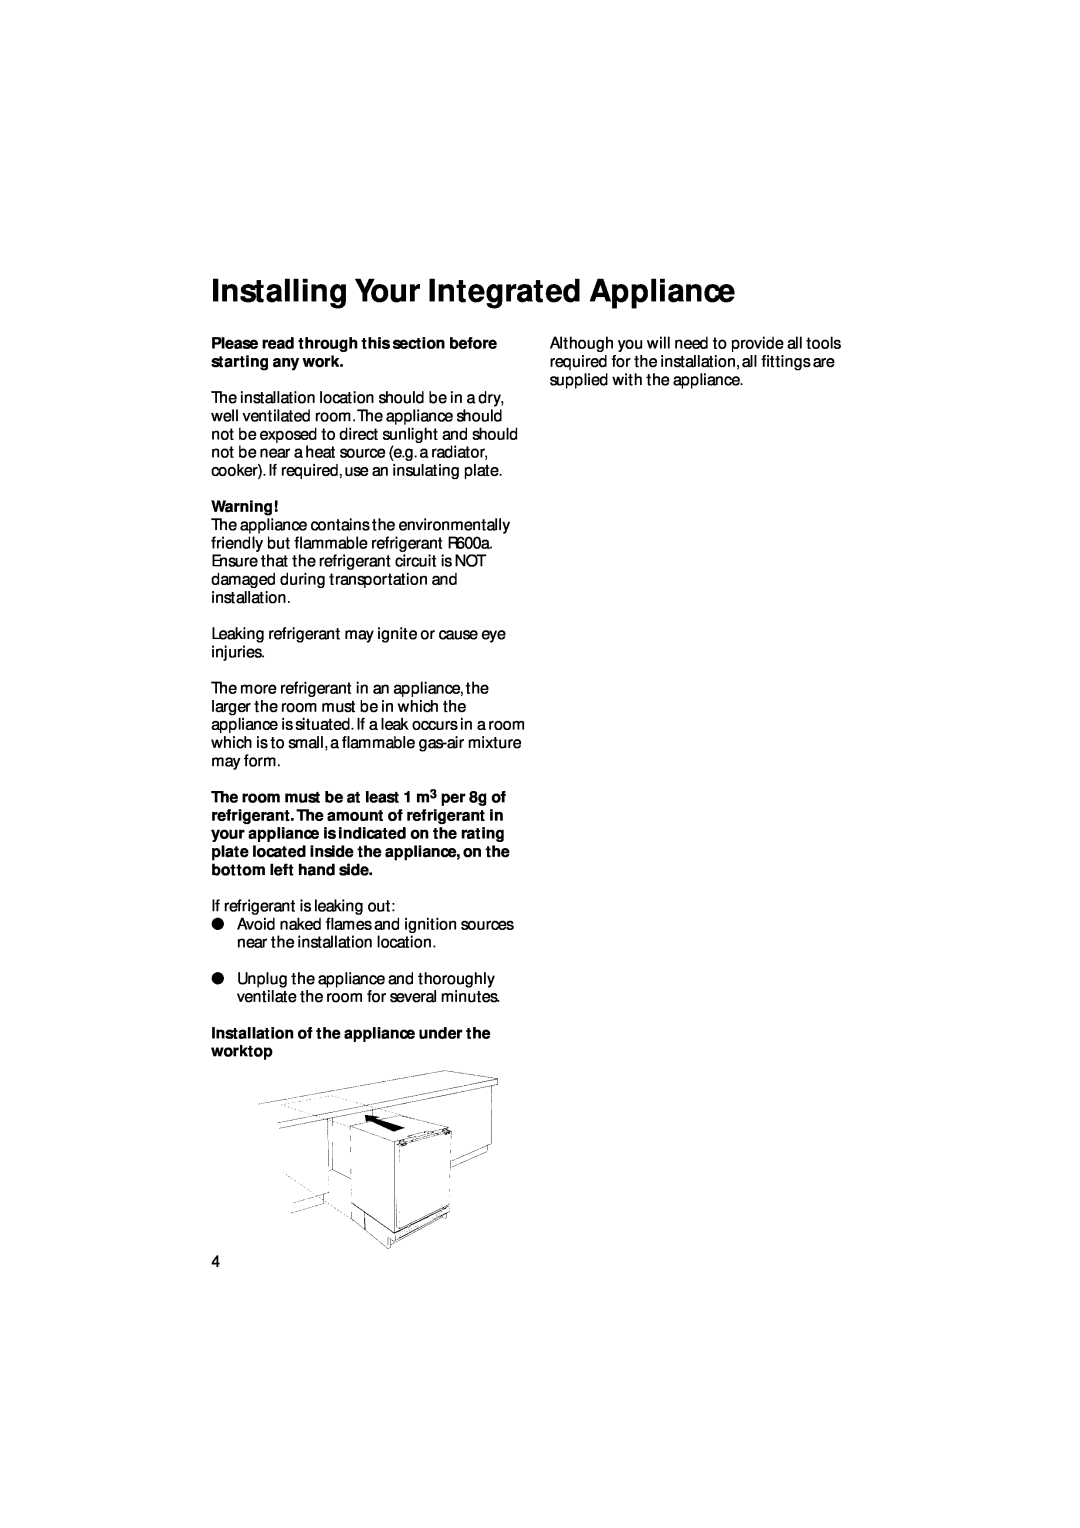 Hotpoint BL31 manual Installing Your Integrated Appliance, Please read through this section before starting any work 